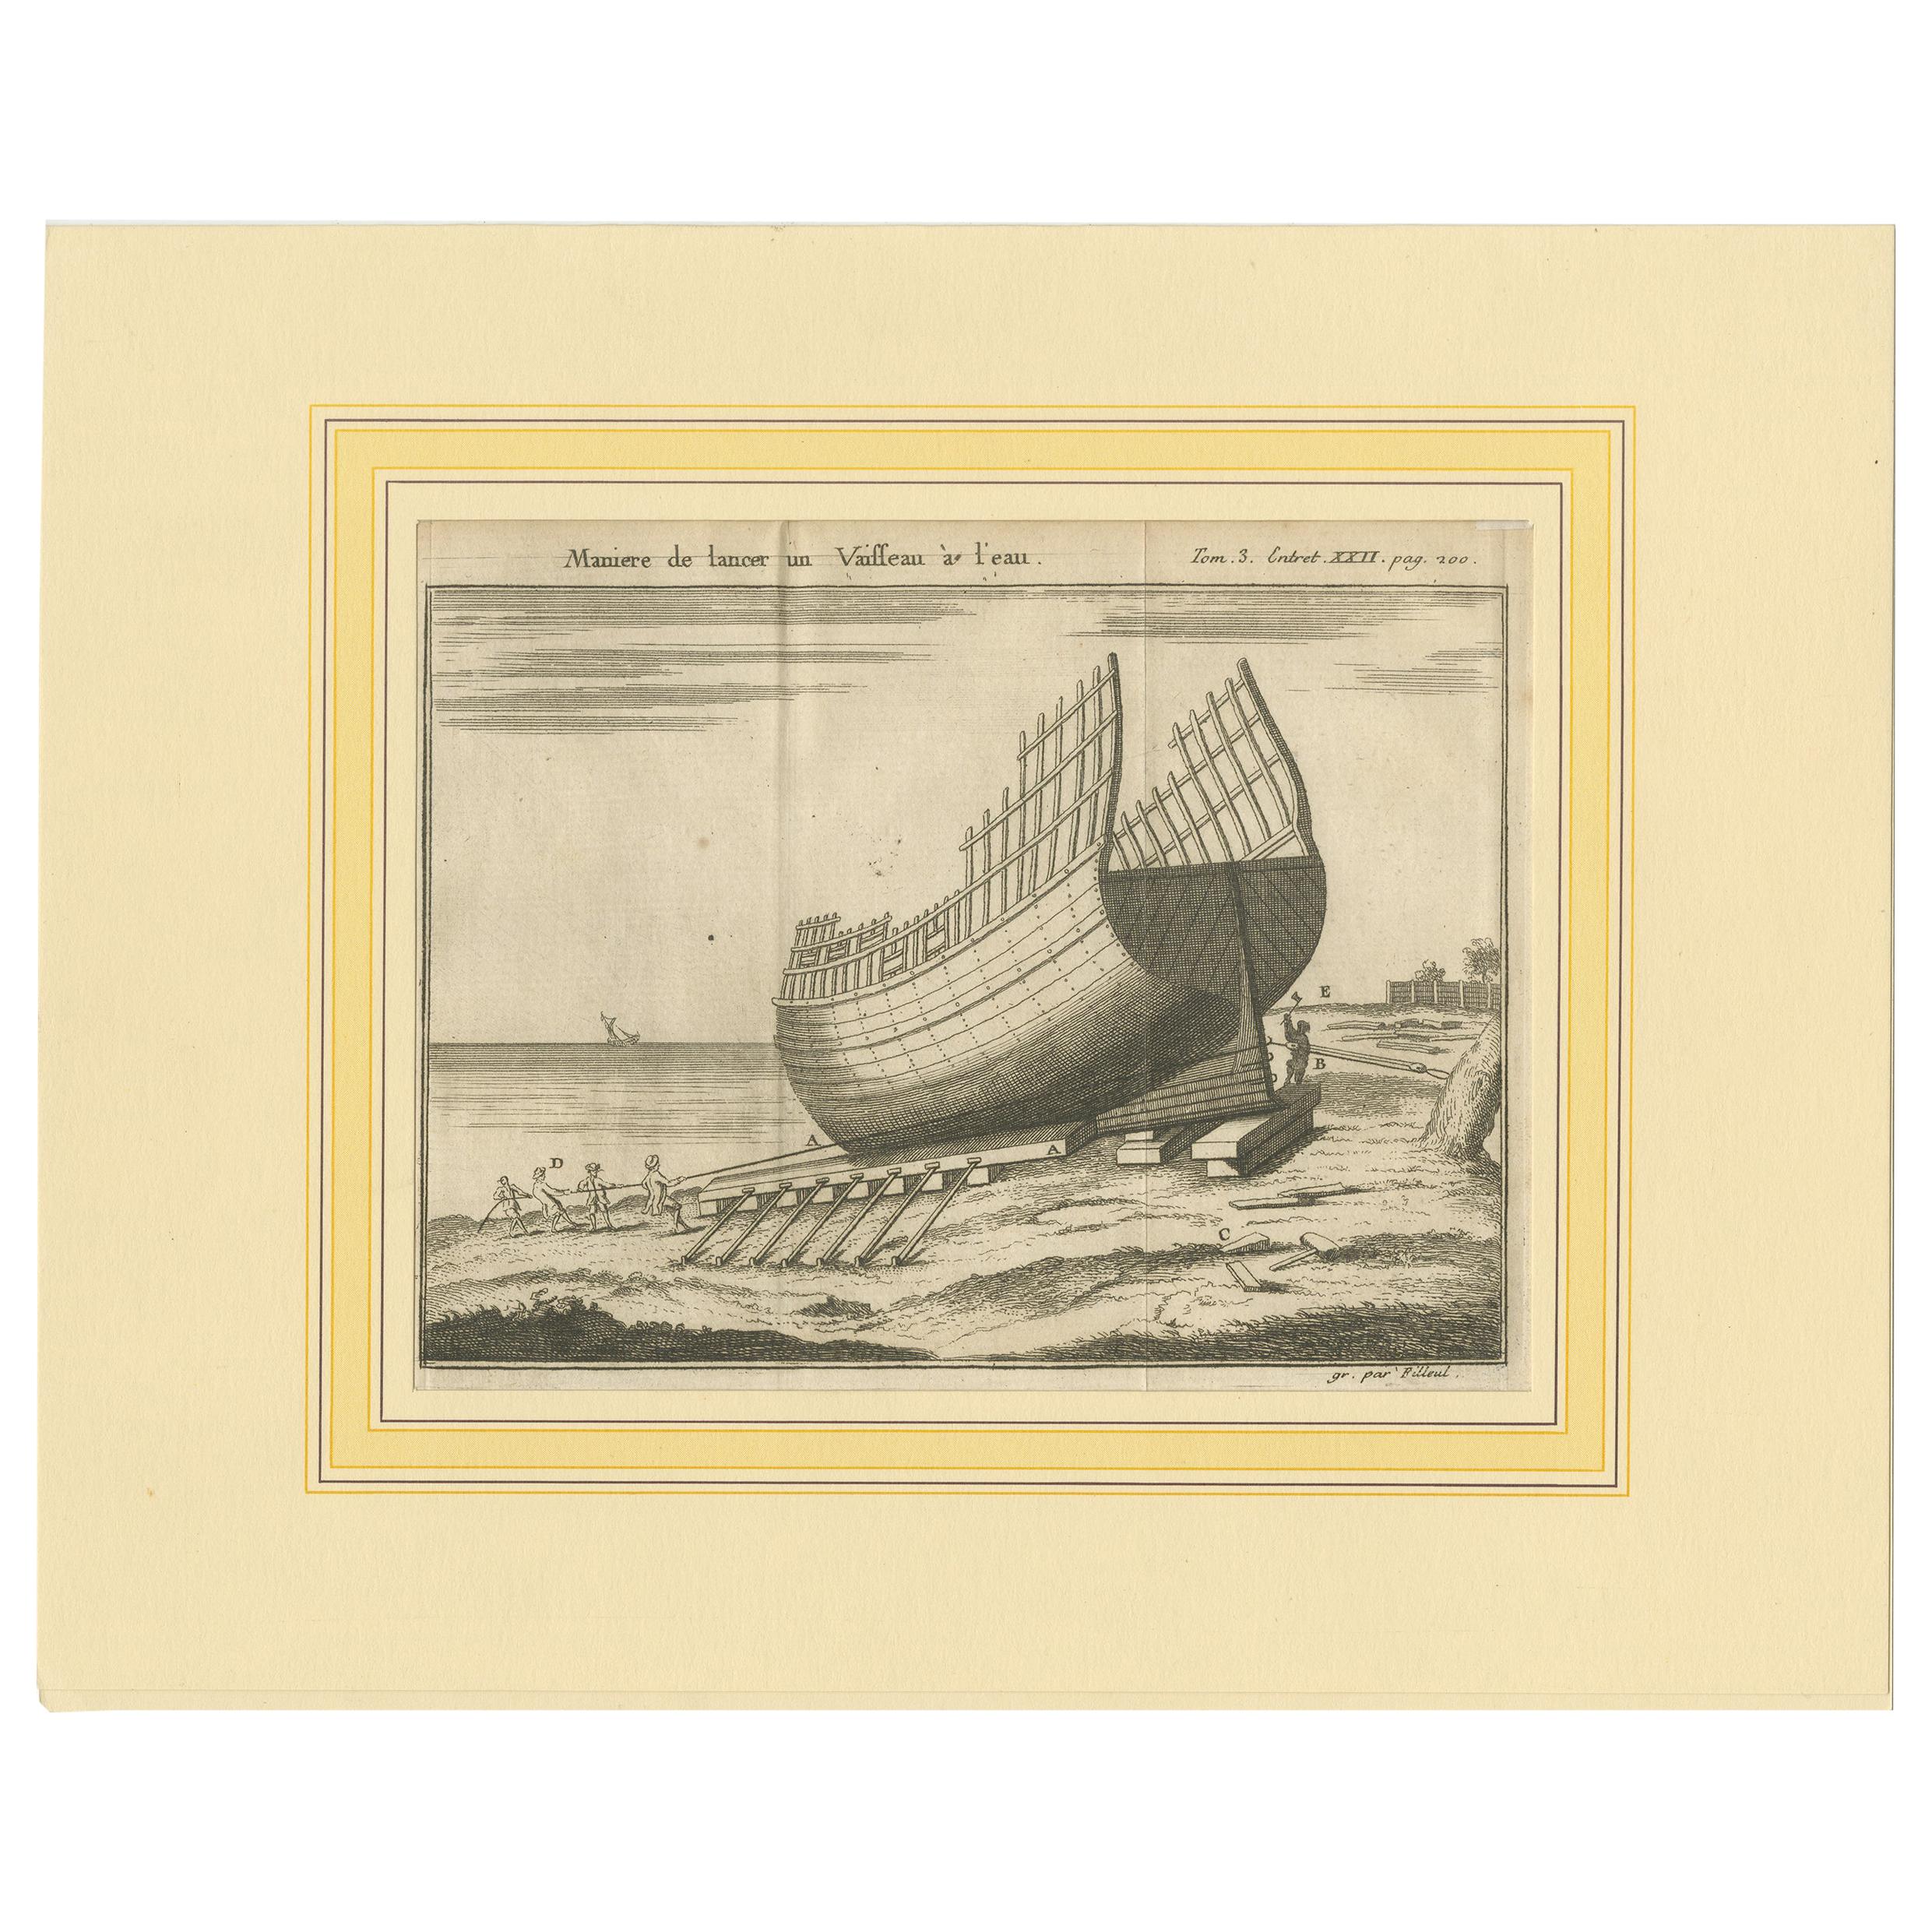 Antique Print of a Ship Launching by Pluche '1735'